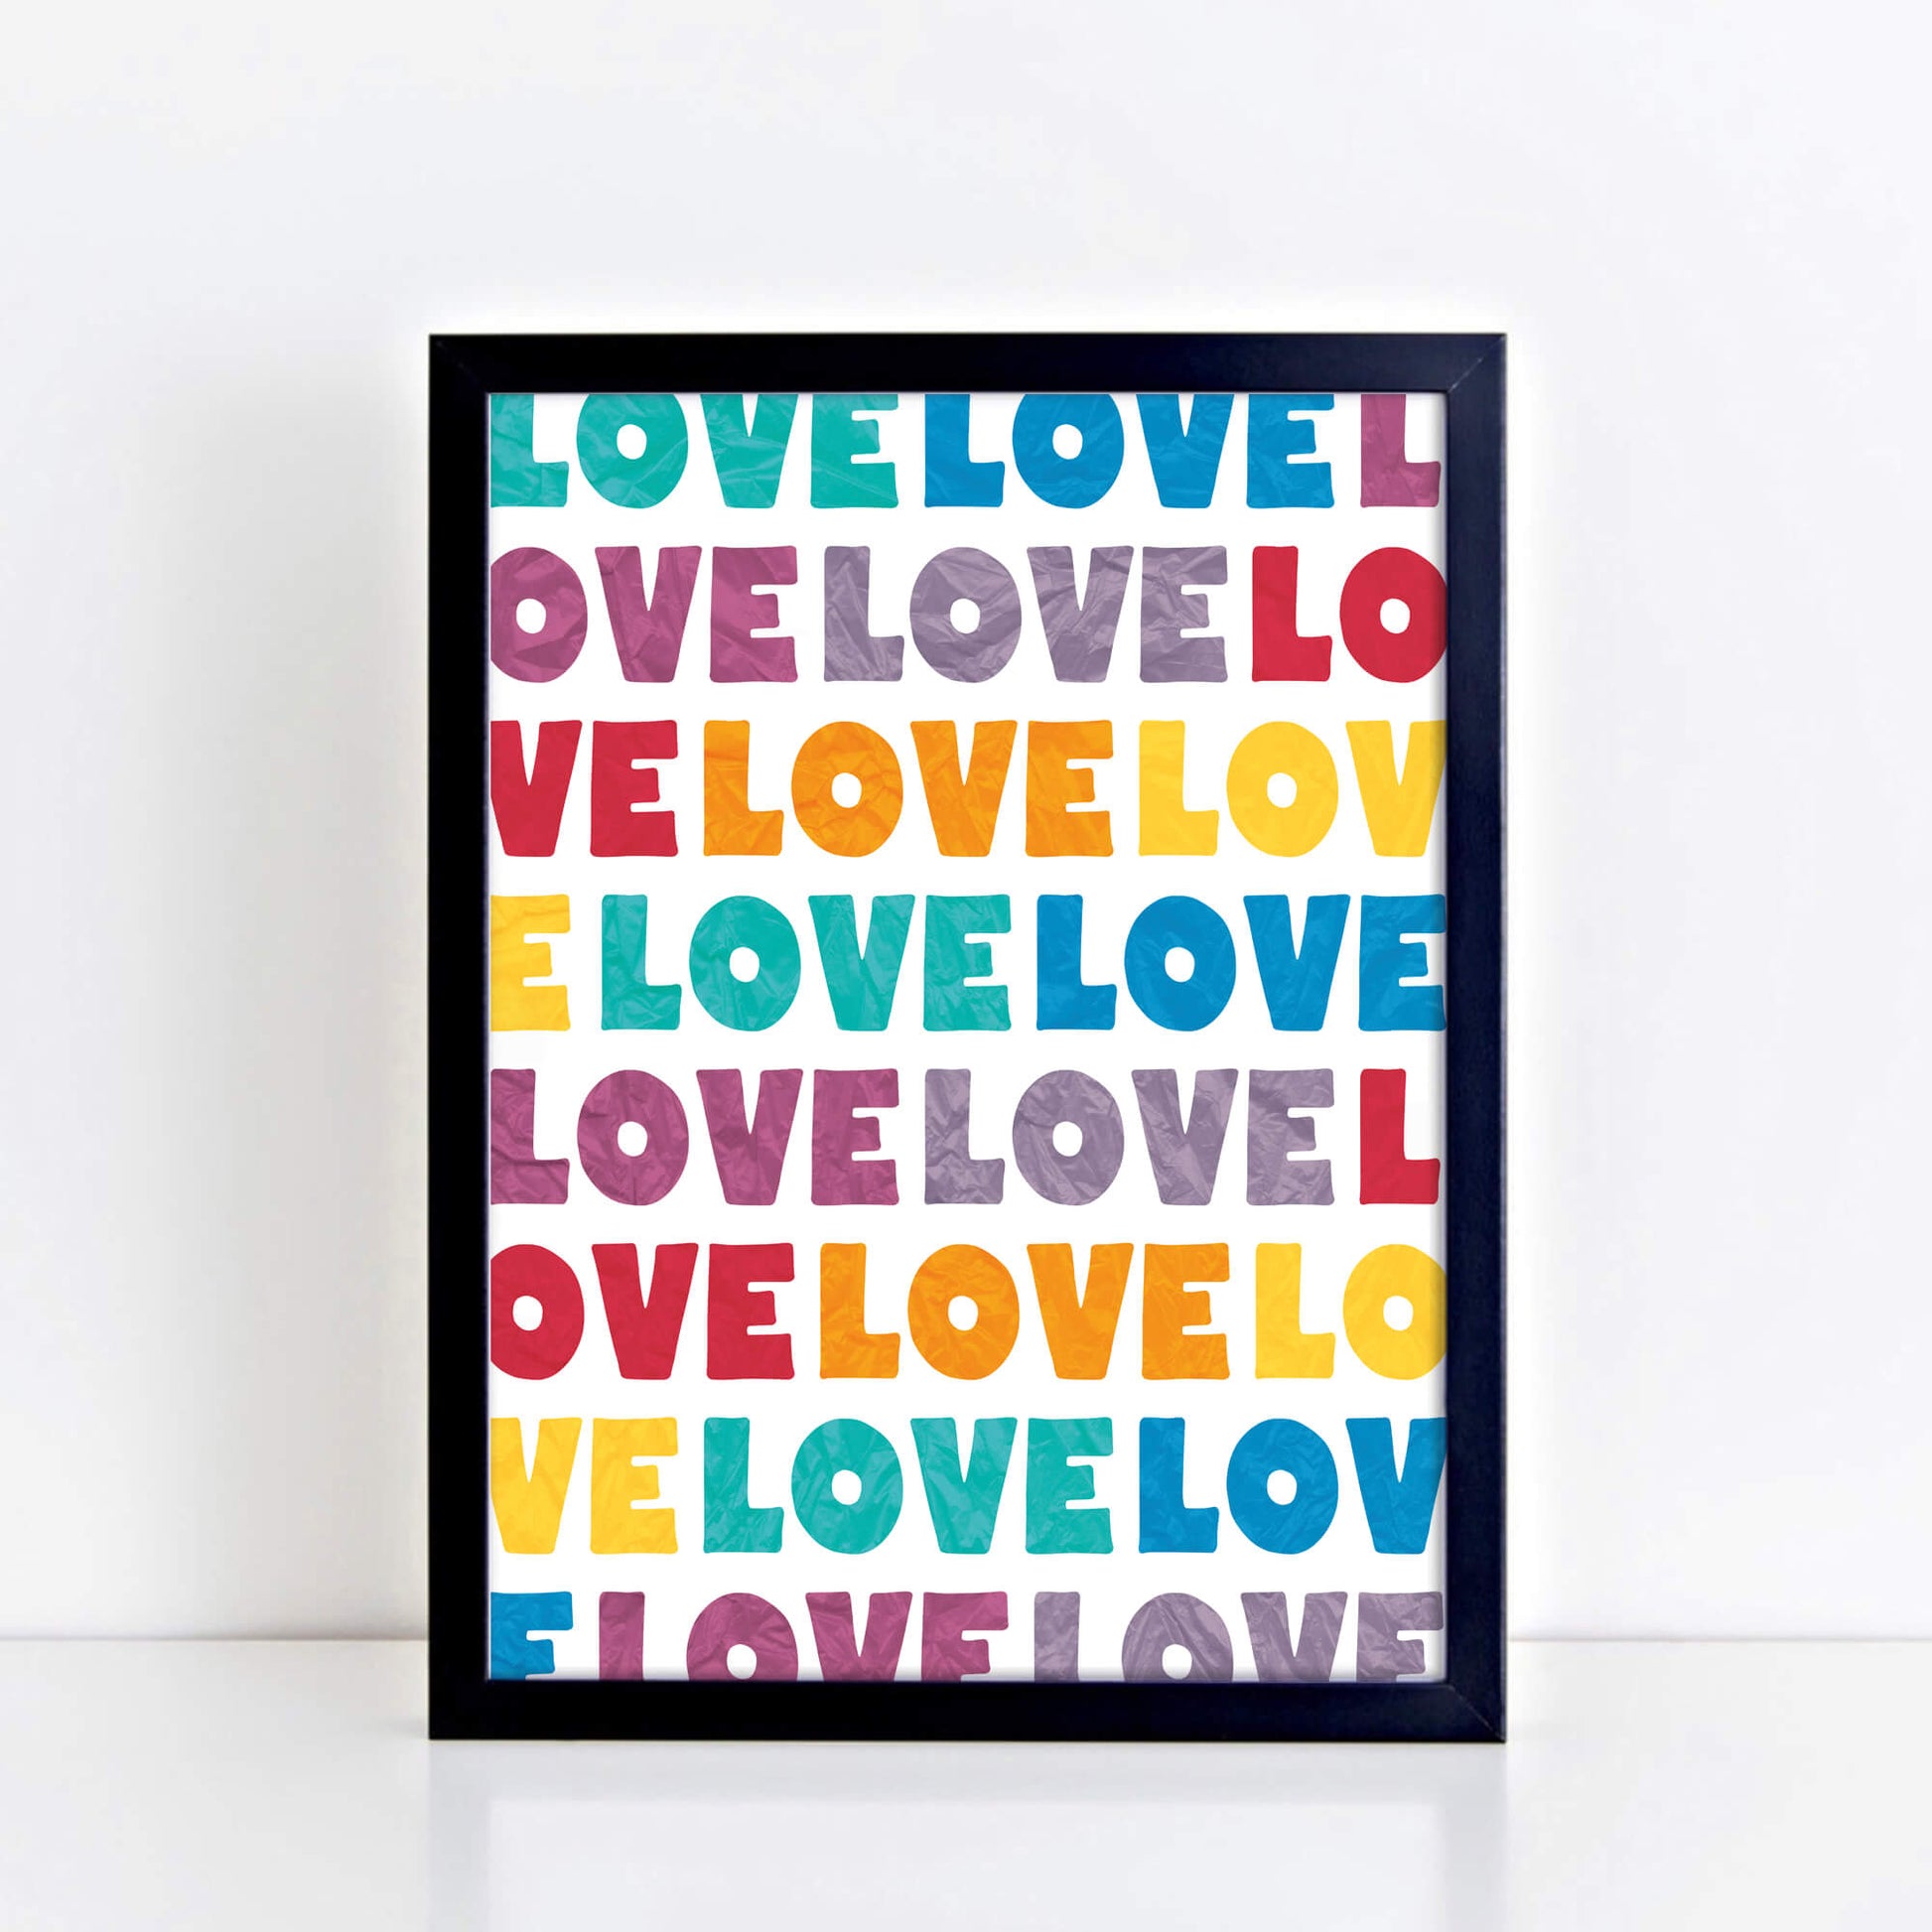 Love Art Print by SixElevenCreations. Product Code SEP0504